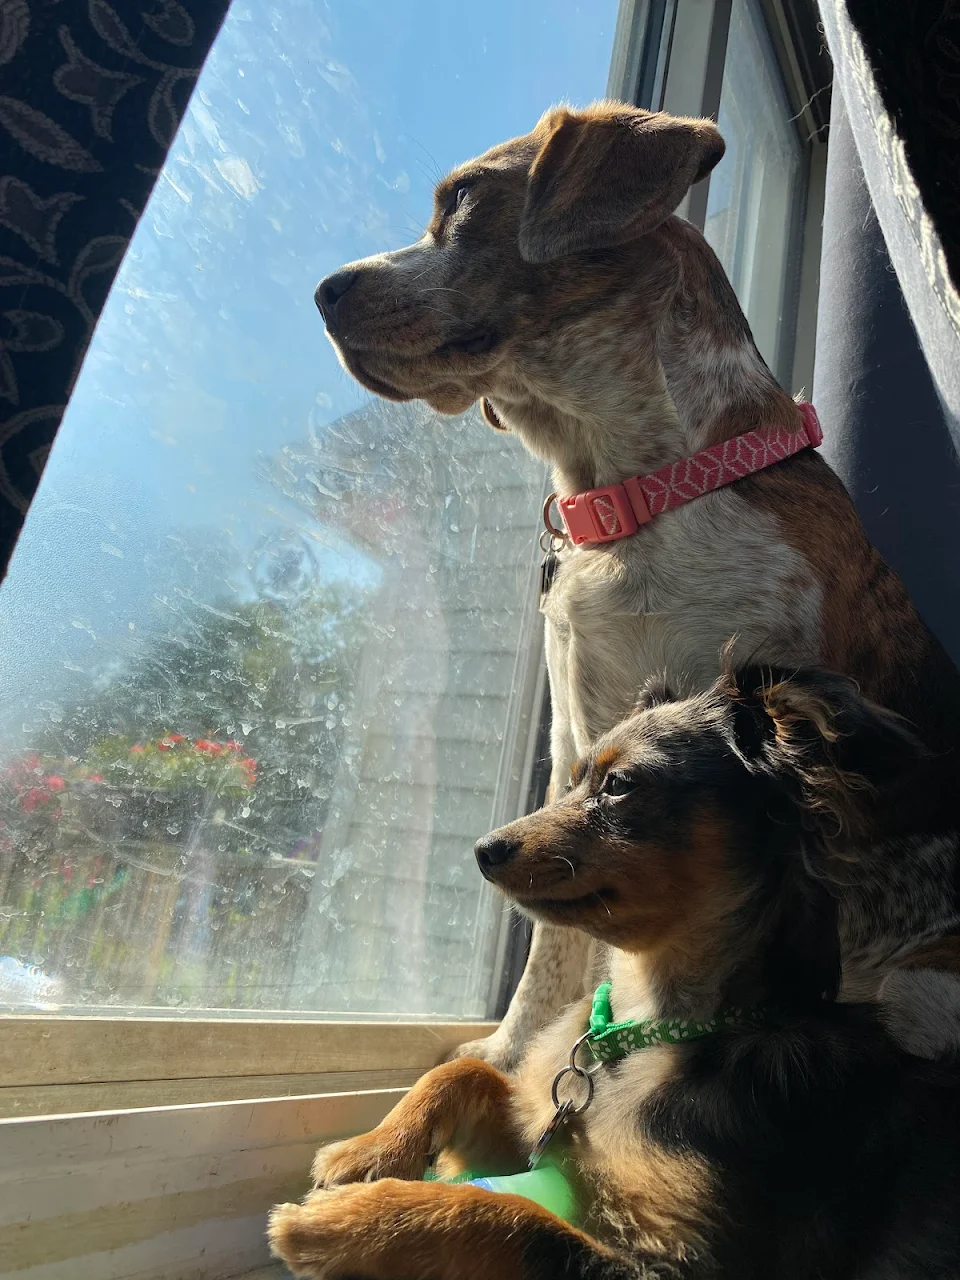 I was told this picture of my dogs turned out rather well. Ignore the nose art.